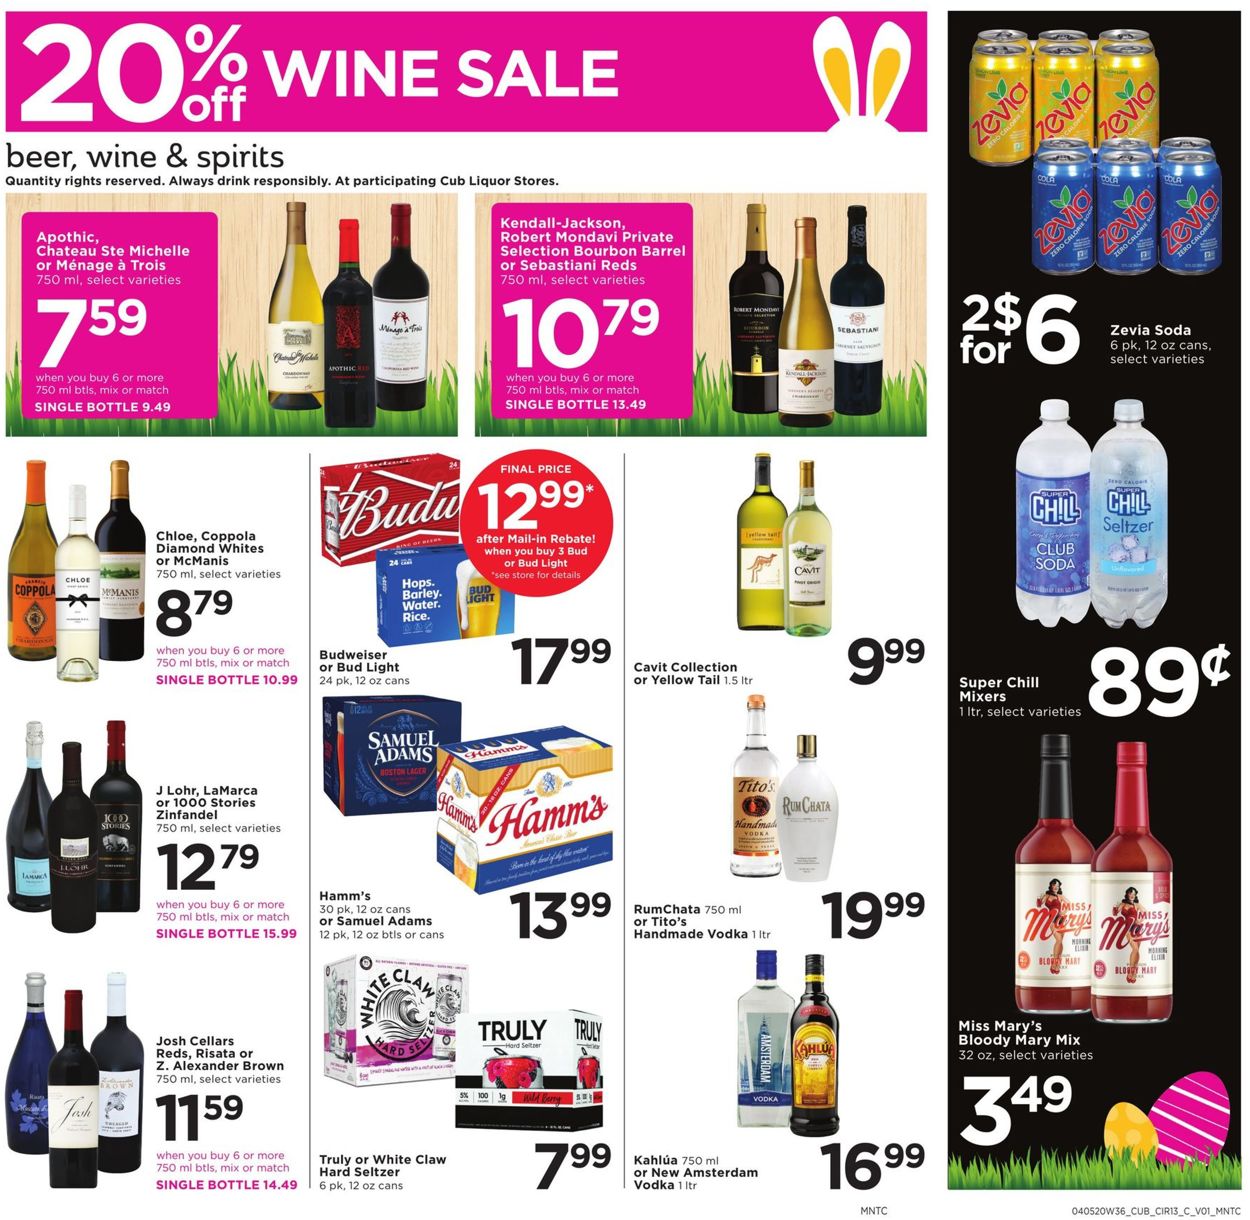 Catalogue Cub Foods from 04/05/2020